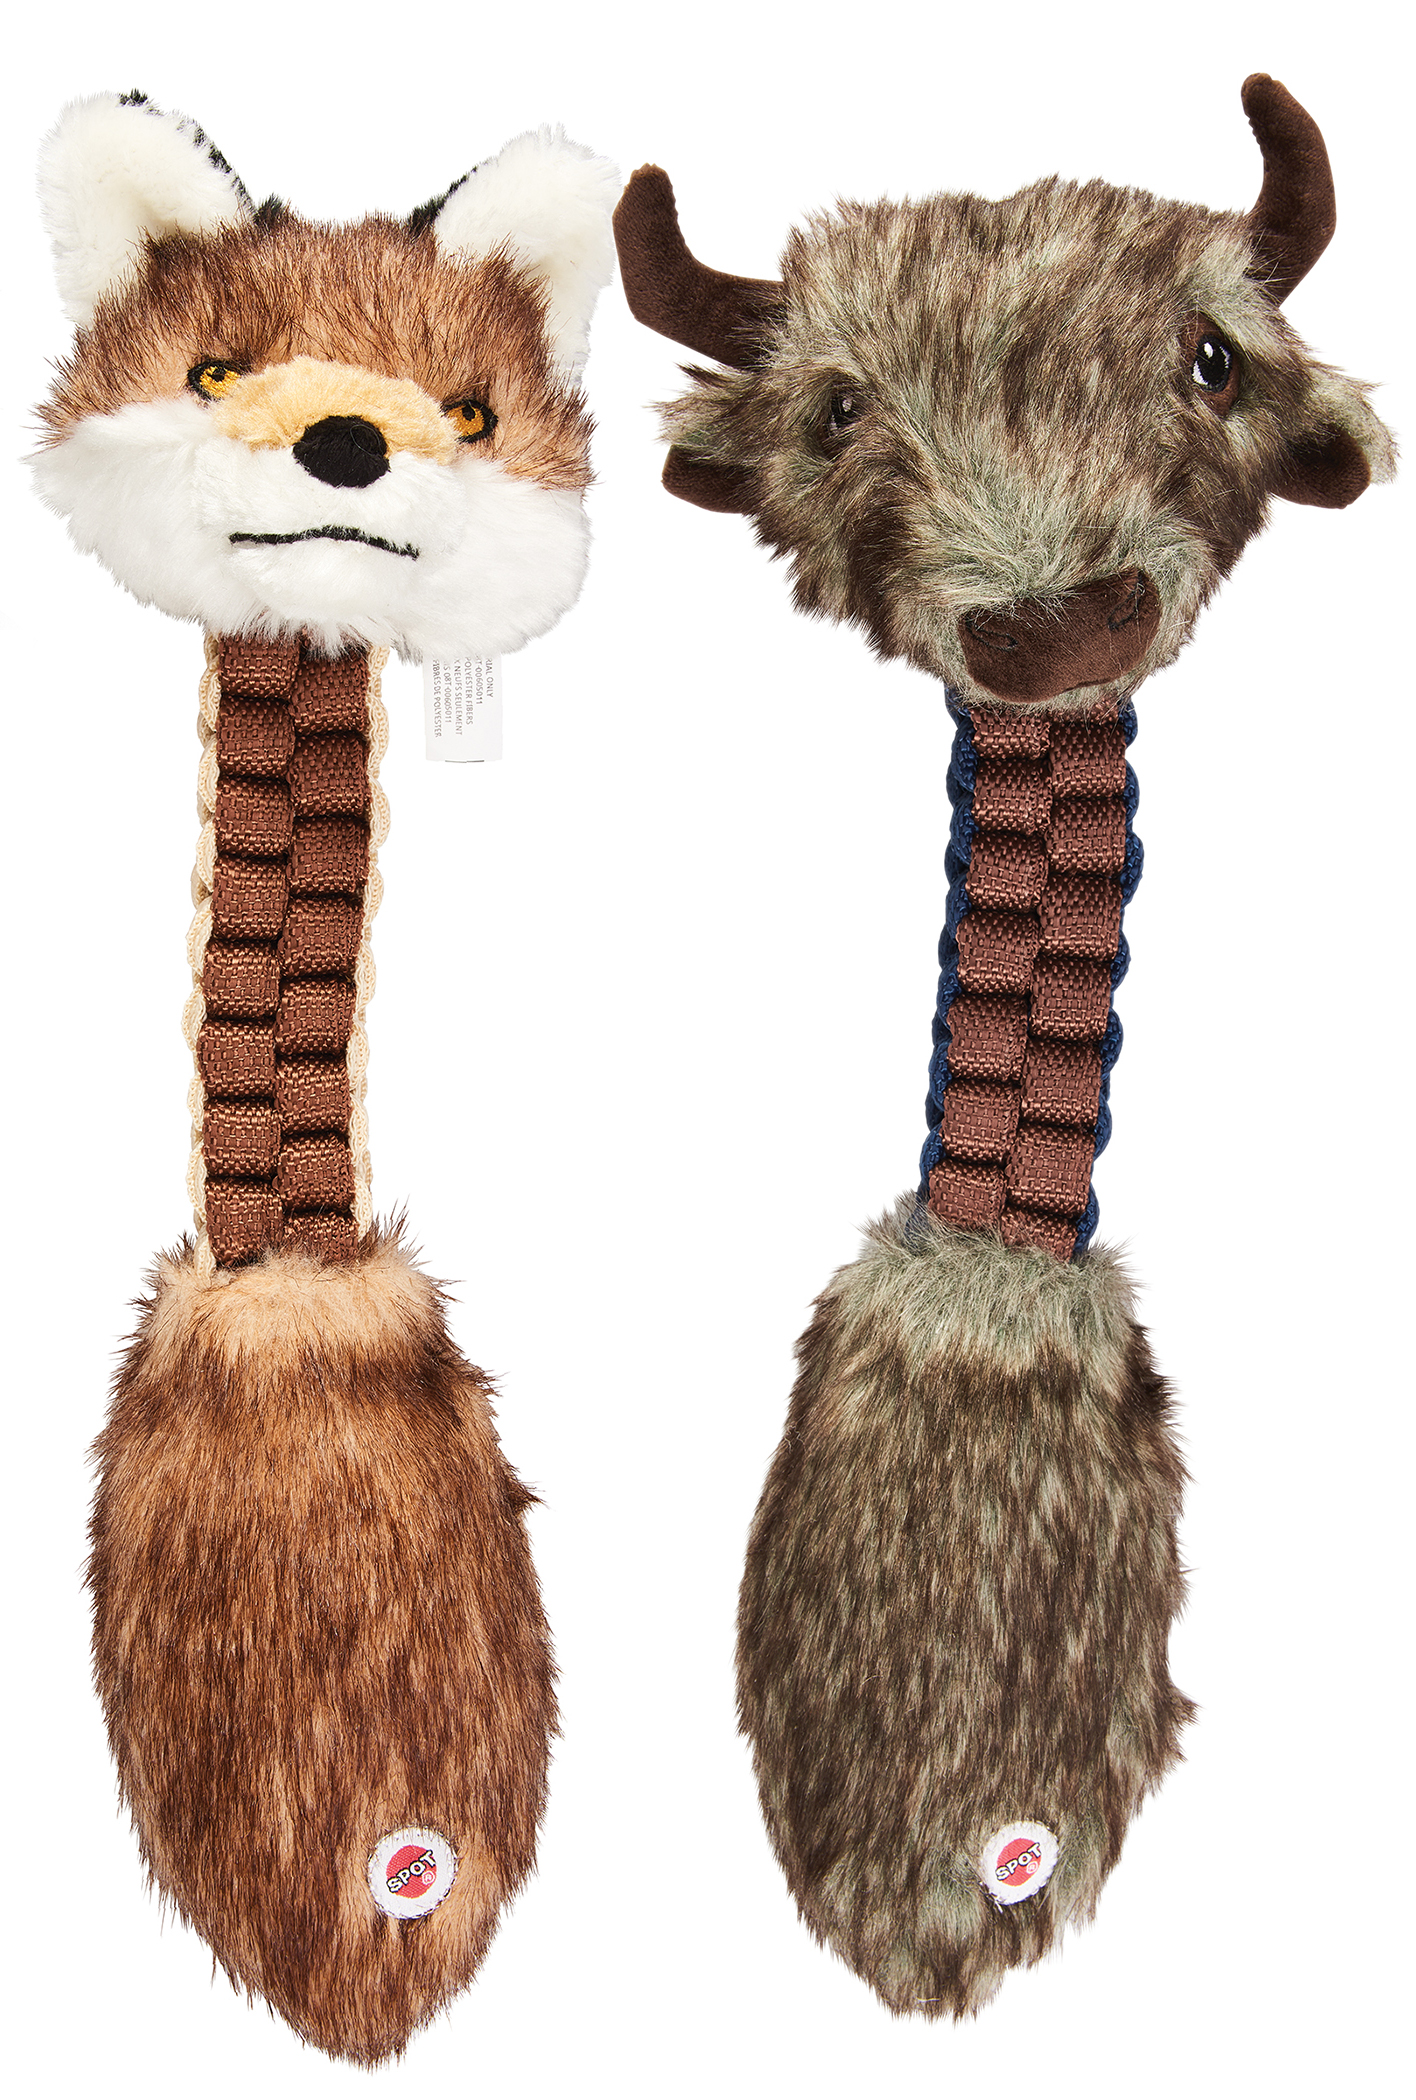 DOG INTERACTIVE TOYS – Forfurs